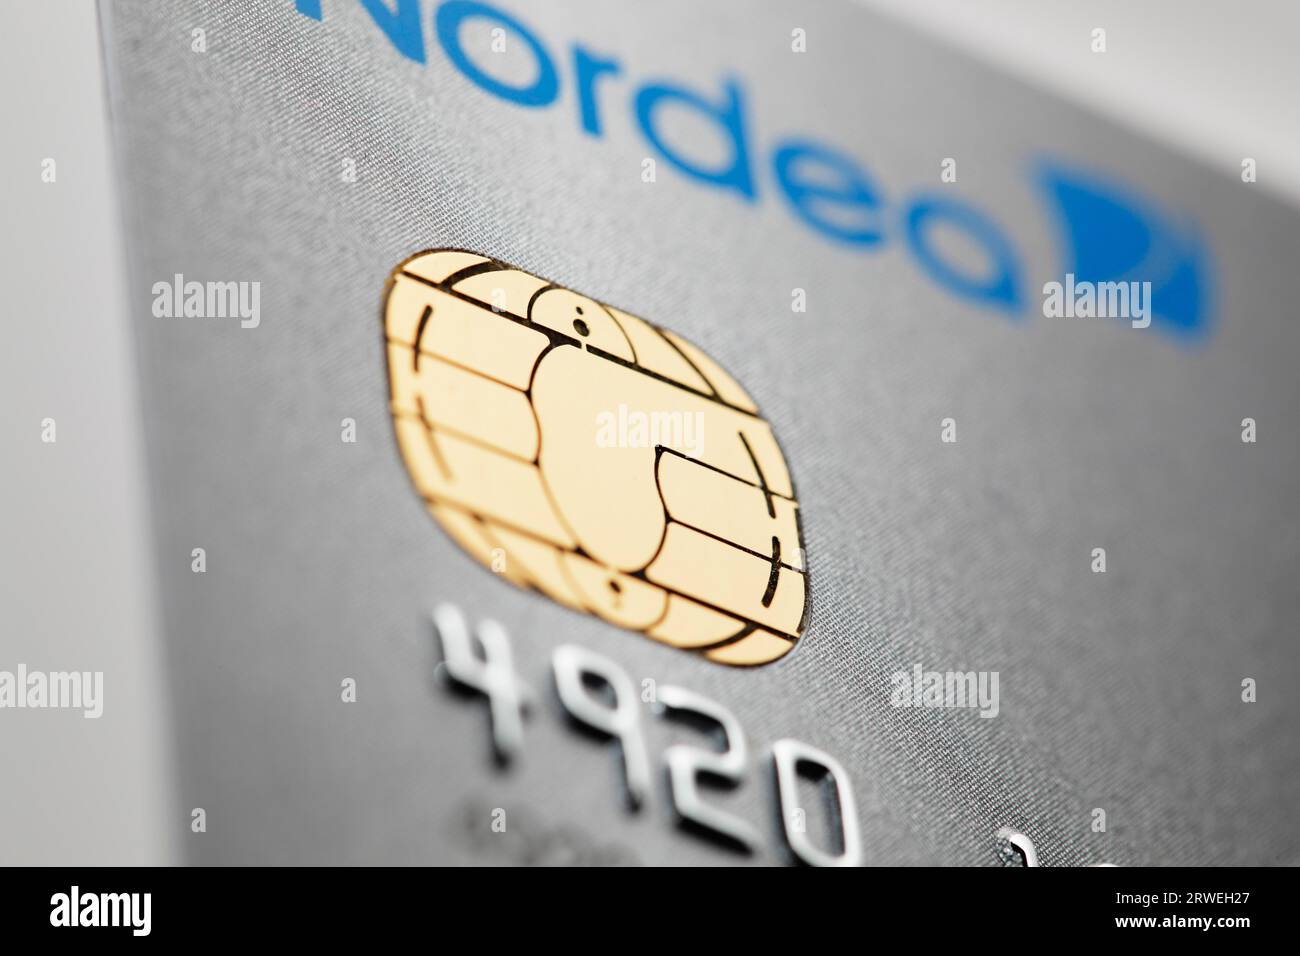 Detail of a icc chip card credit card issued by Nordea bank Stock Photo